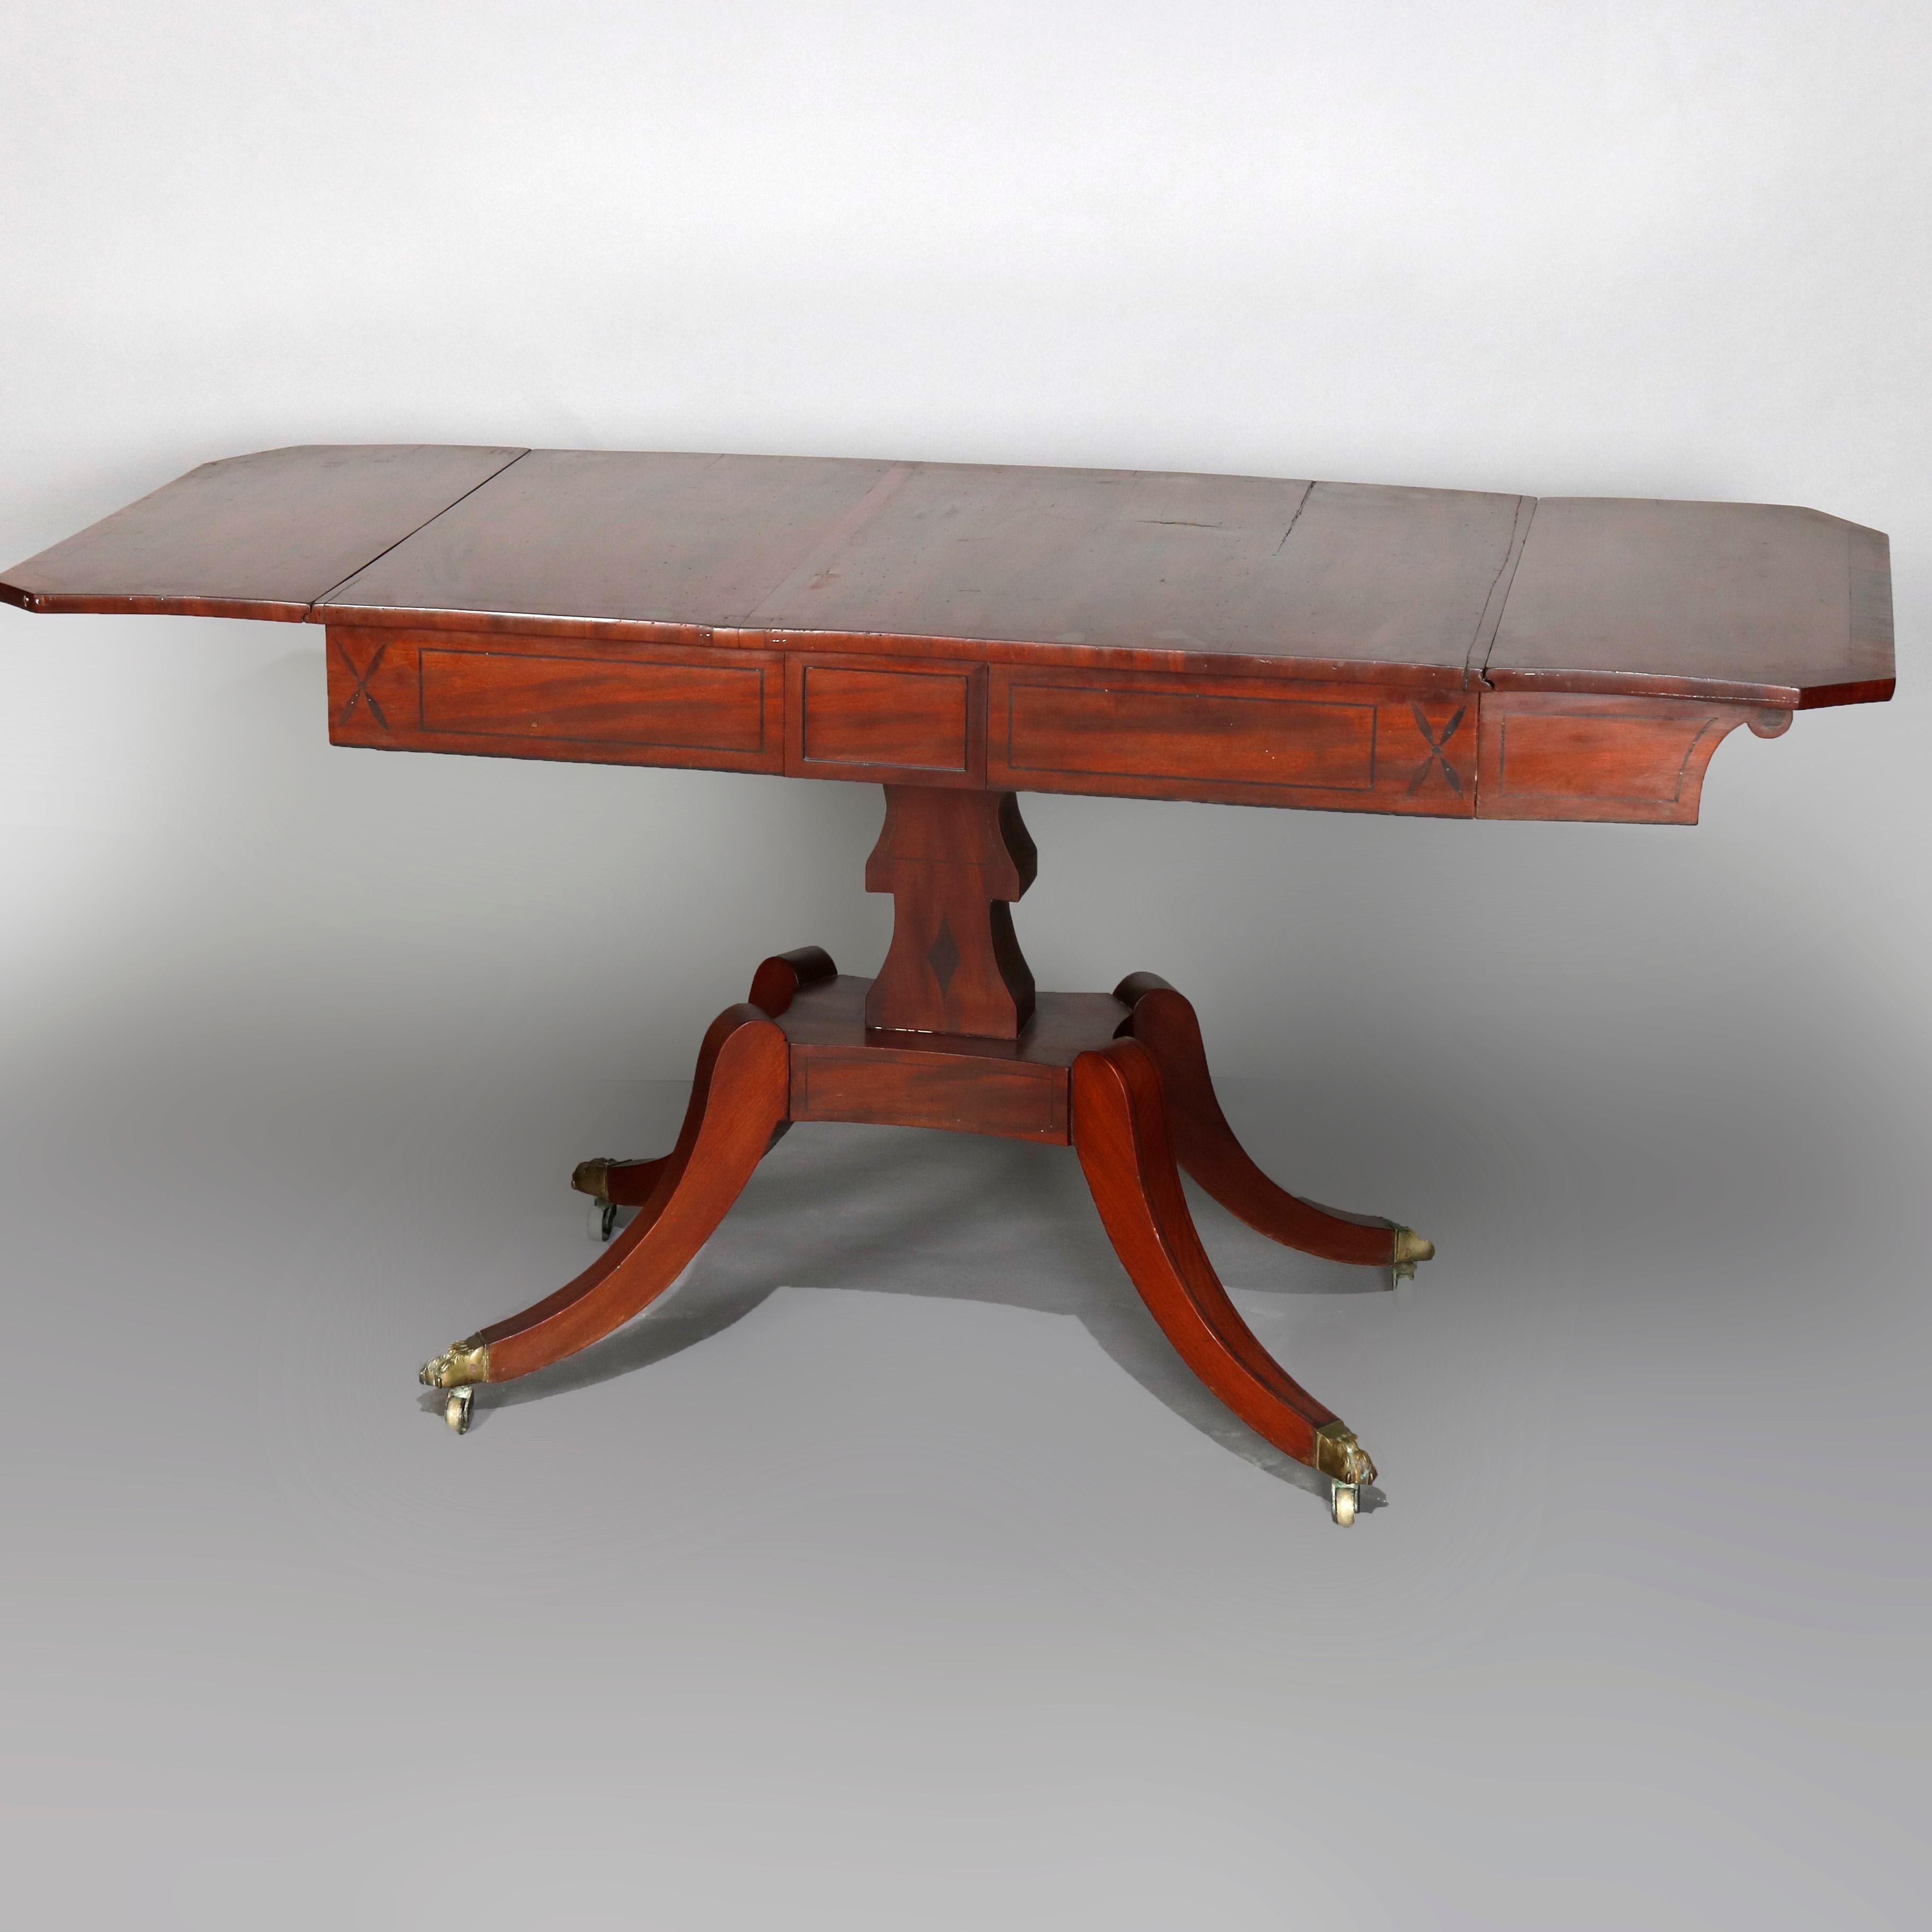 An antique English George III table offers deeply striated mahogany construction with top having crossbanding over two drawers and drop leaves raised on pedestal with four concave form legs terminating in bronze paw form caps, circa